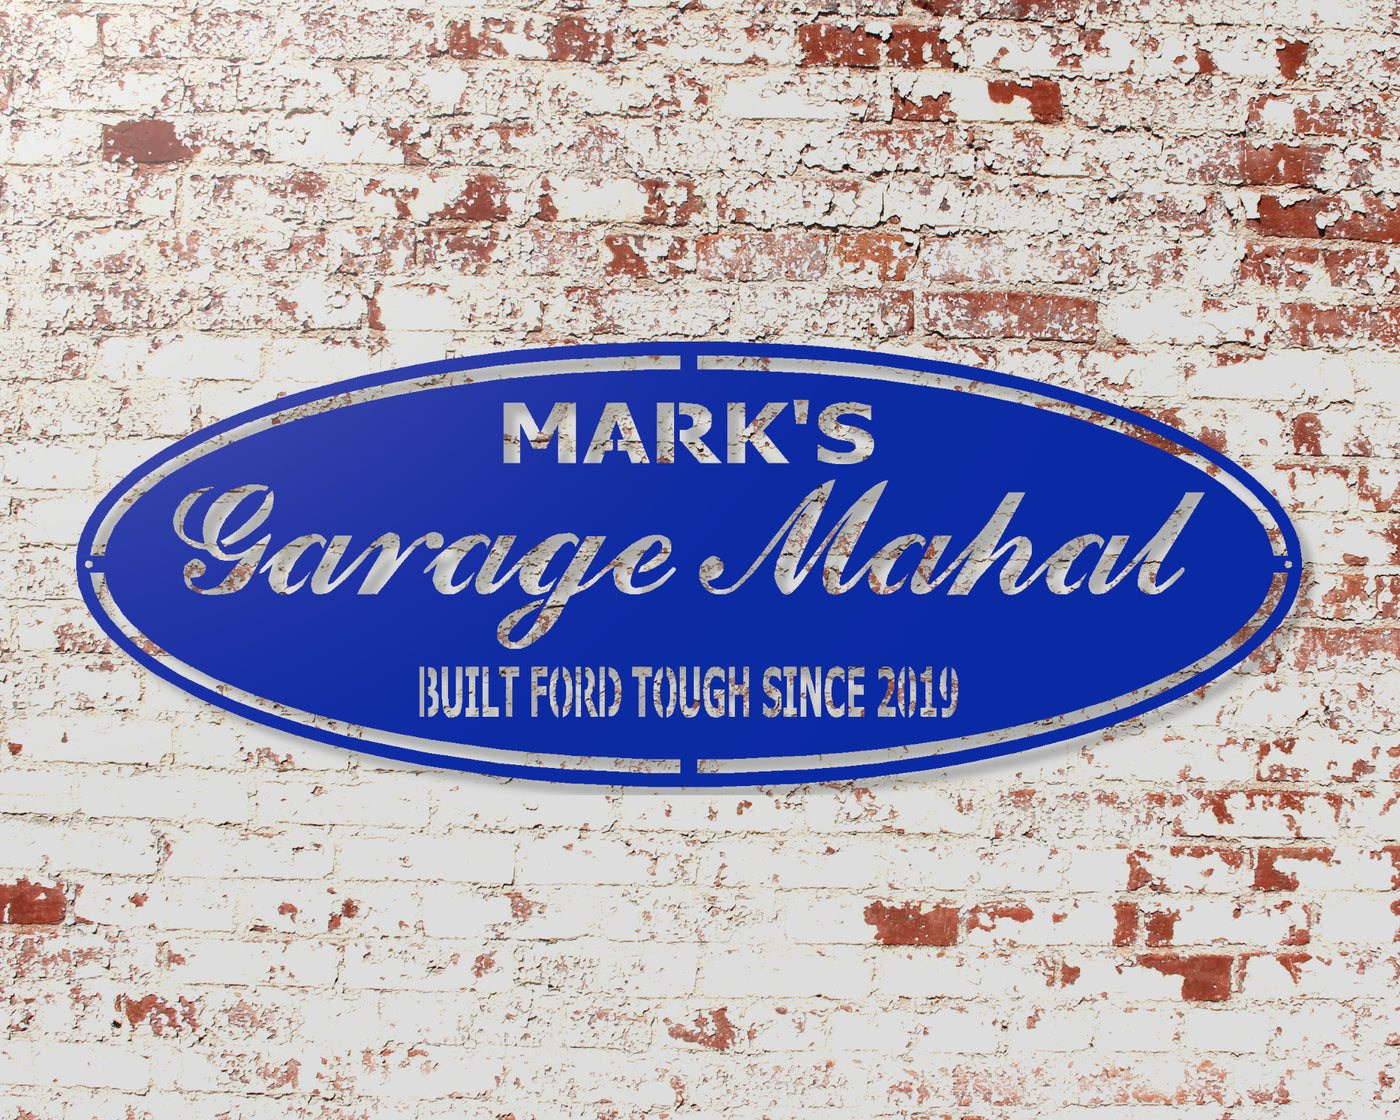 Personalized Garage Mahal Metal Sign - Madison Iron and Wood - Personalized sign - metal outdoor decor - Steel deocrations - american made products - veteran owned business products - fencing decorations - fencing supplies - custom wall decorations - personalized wall signs - steel - decorative post caps - steel post caps - metal post caps - brackets - structural brackets - home improvement - easter - easter decorations - easter gift - easter yard decor